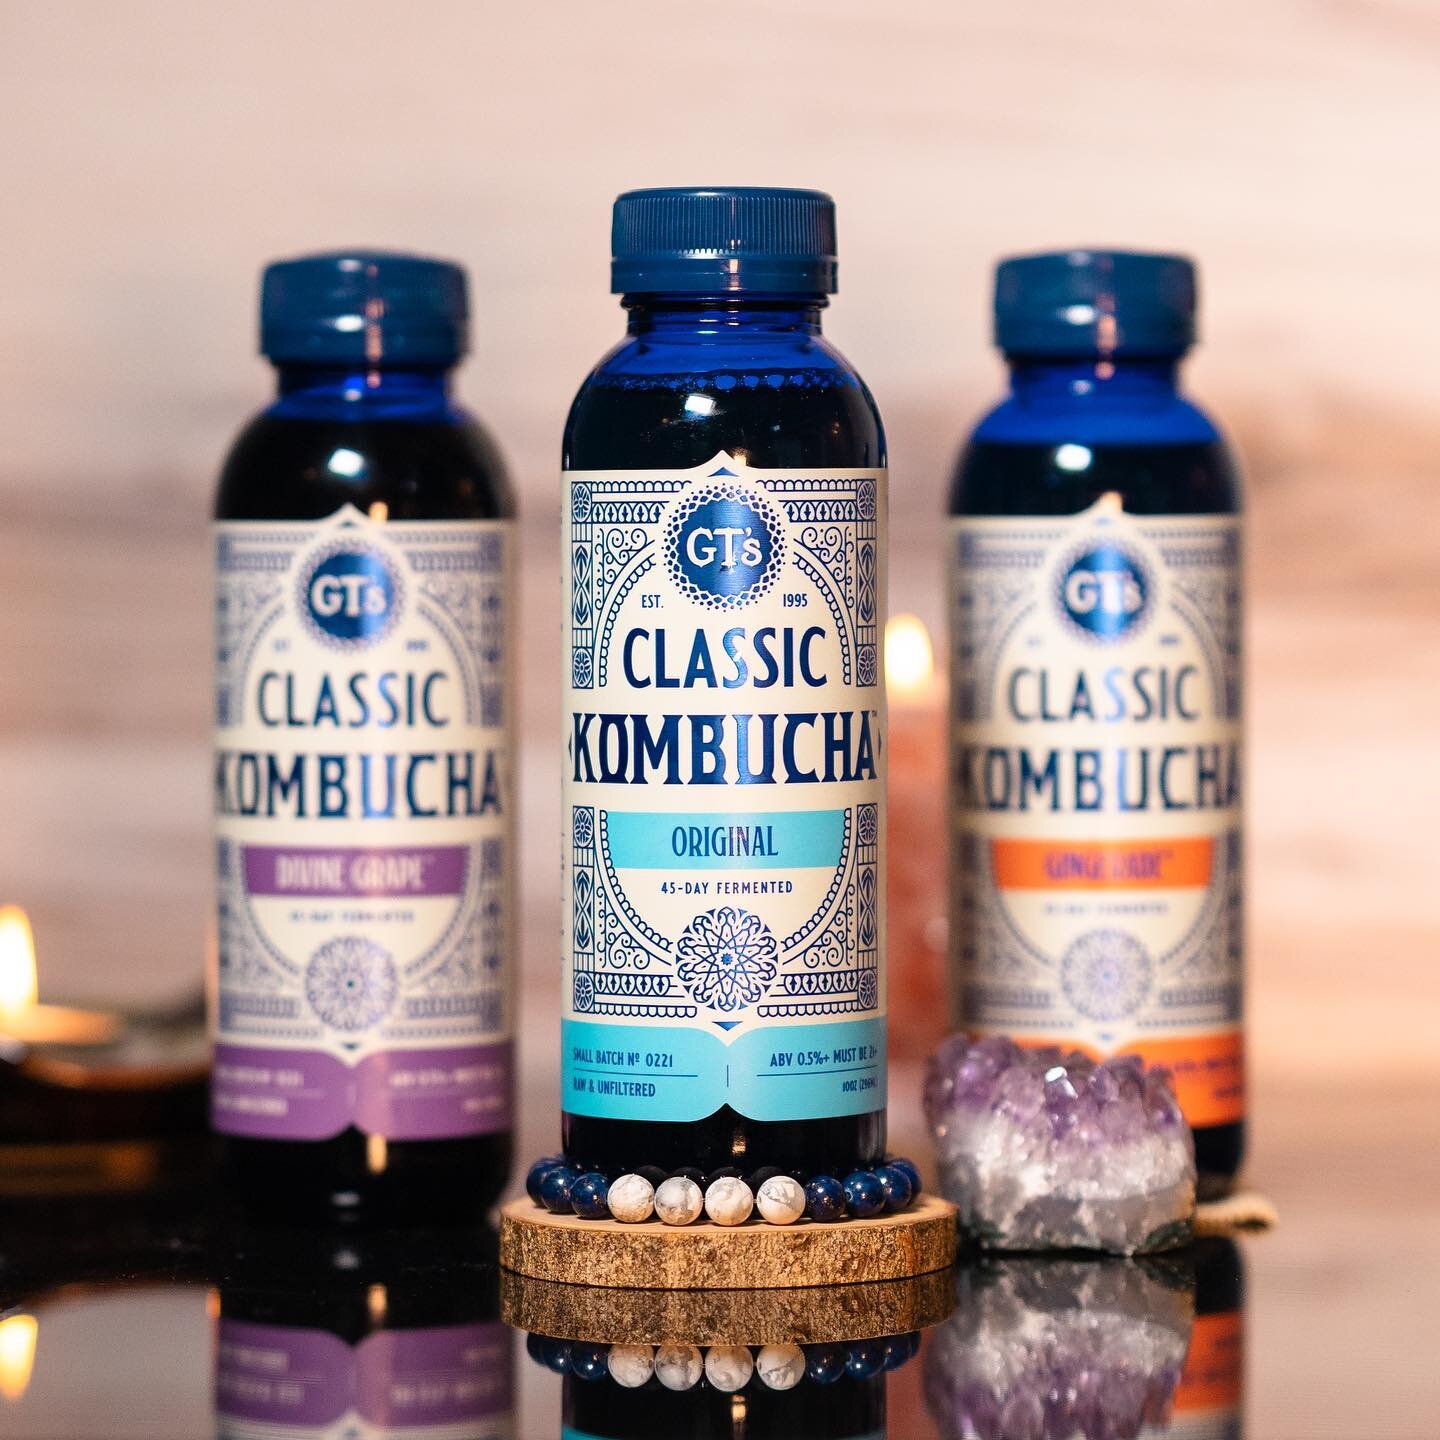 It was an honor reimagining the GT&rsquo;s Living Foods Classic Kombucha label. Classic is the original recipe GT began bottling in 1995 which launched the Kombucha category. It stays true to how kombucha was crafted thousand of years ago. With roots